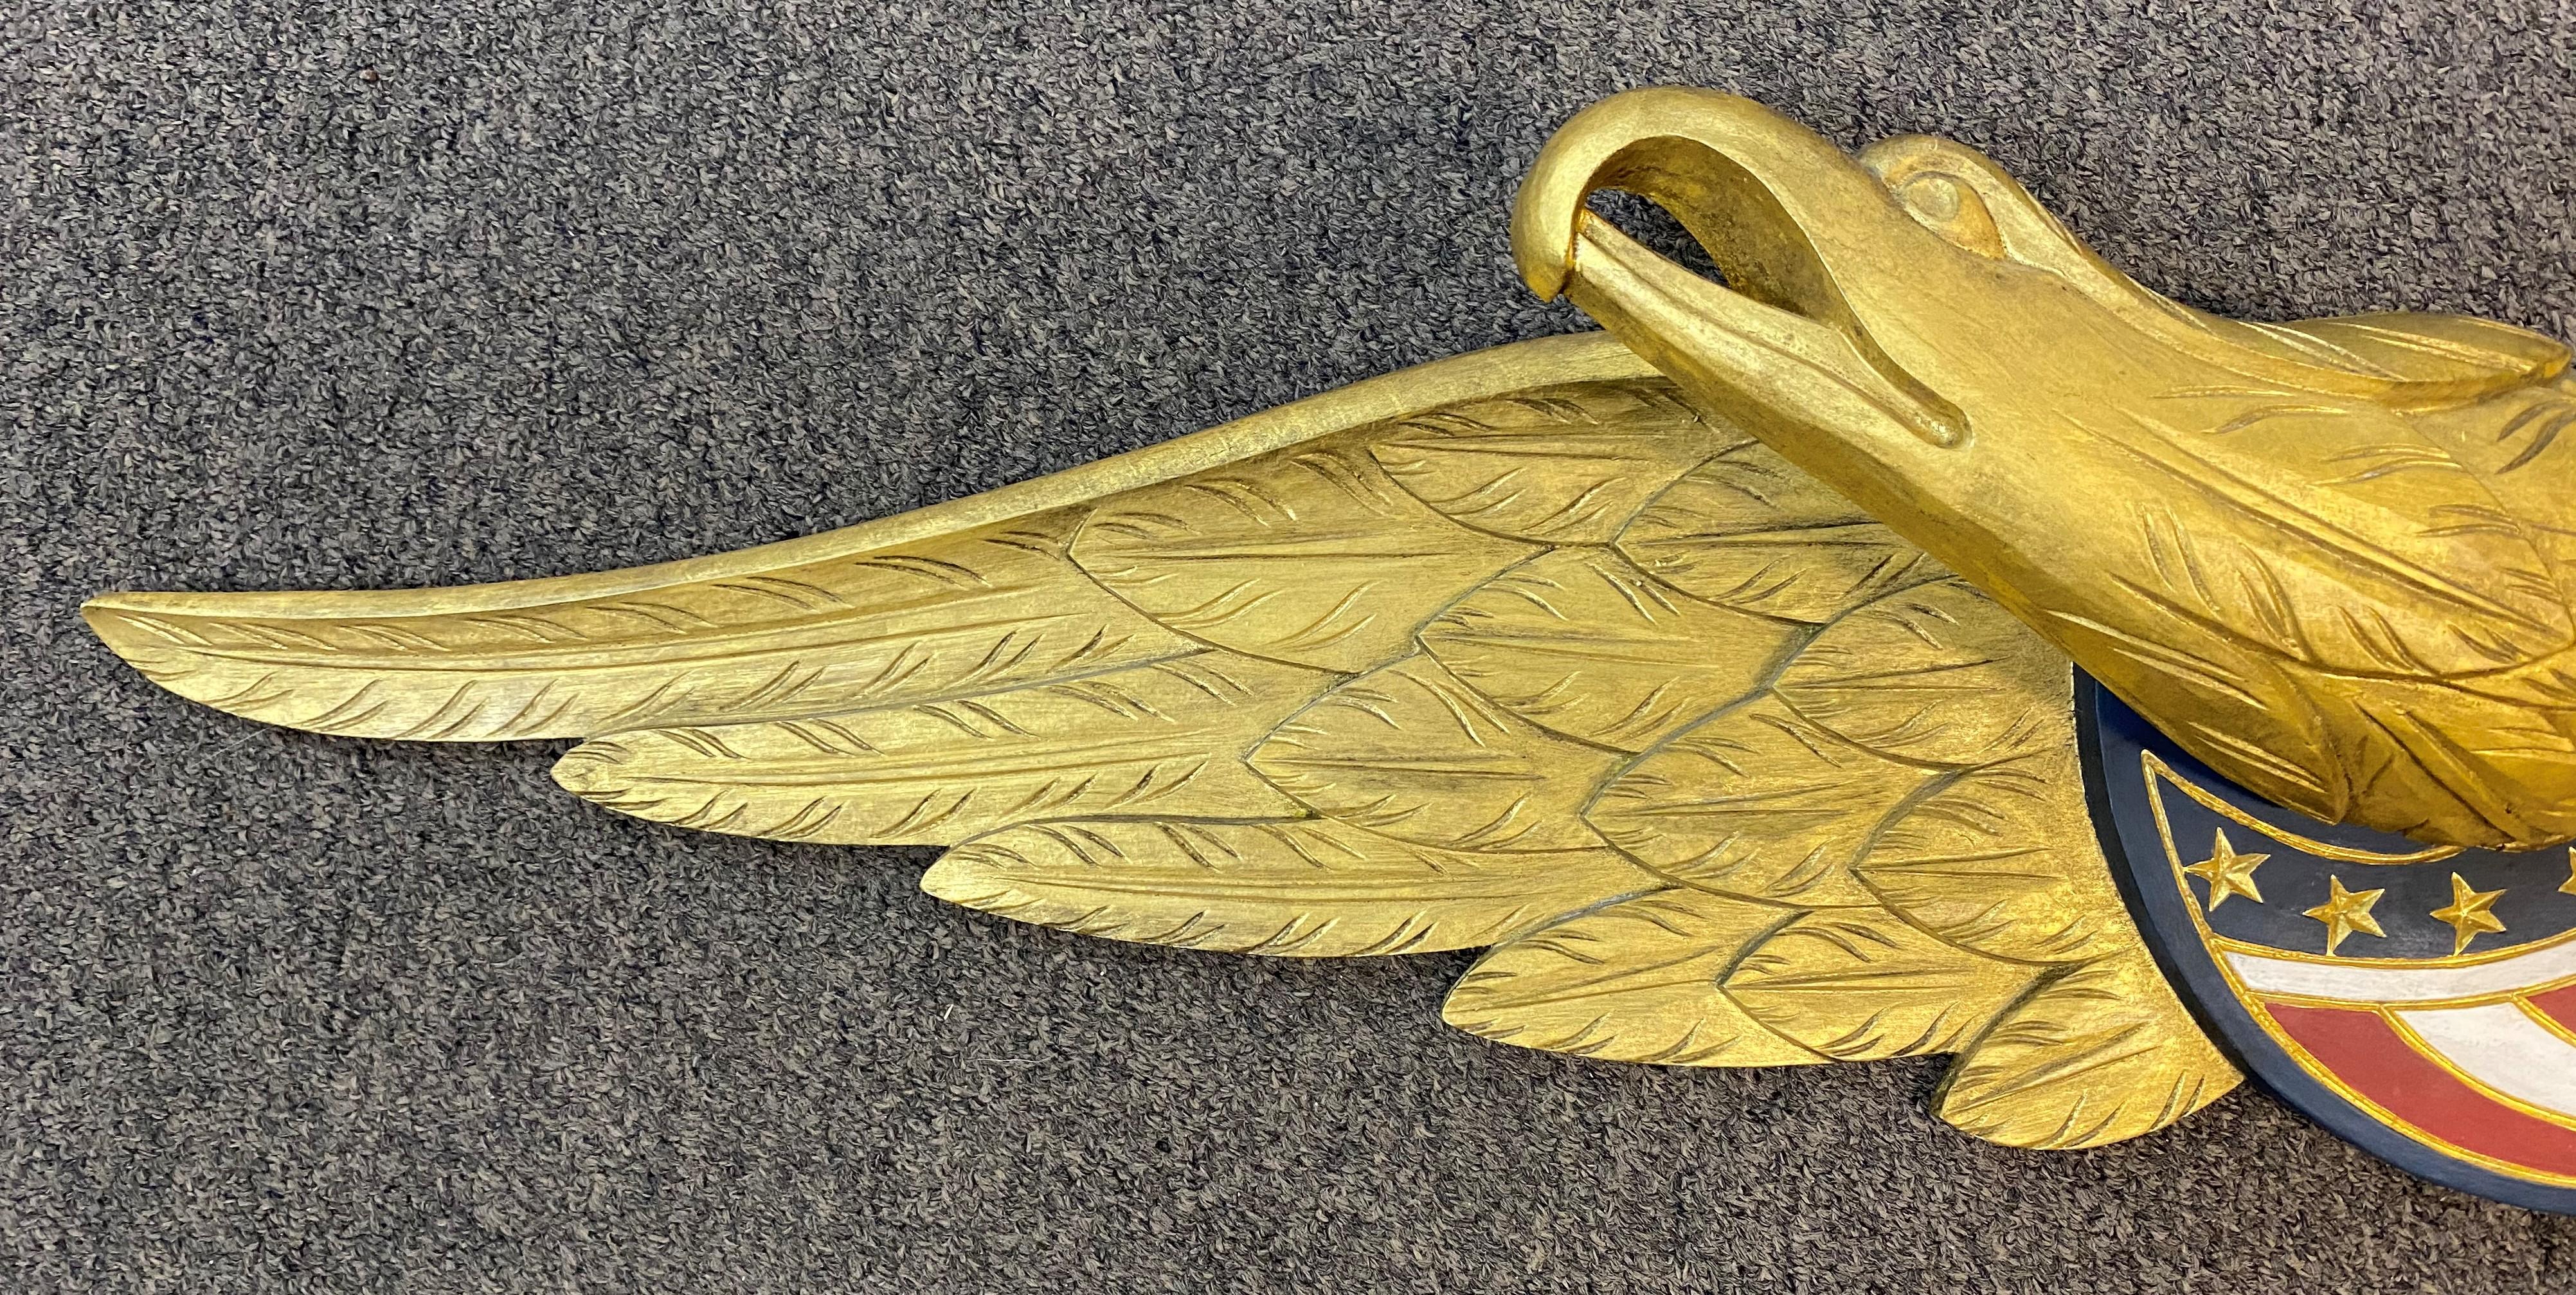 A finely detailed hand carved and gilt wooden Bellamy style eagle wall plaque with painted American flag shield decoration by contemporary Cape Cod artist Paul White. White is from East Sandwich, Massachusetts and is among the most respected and